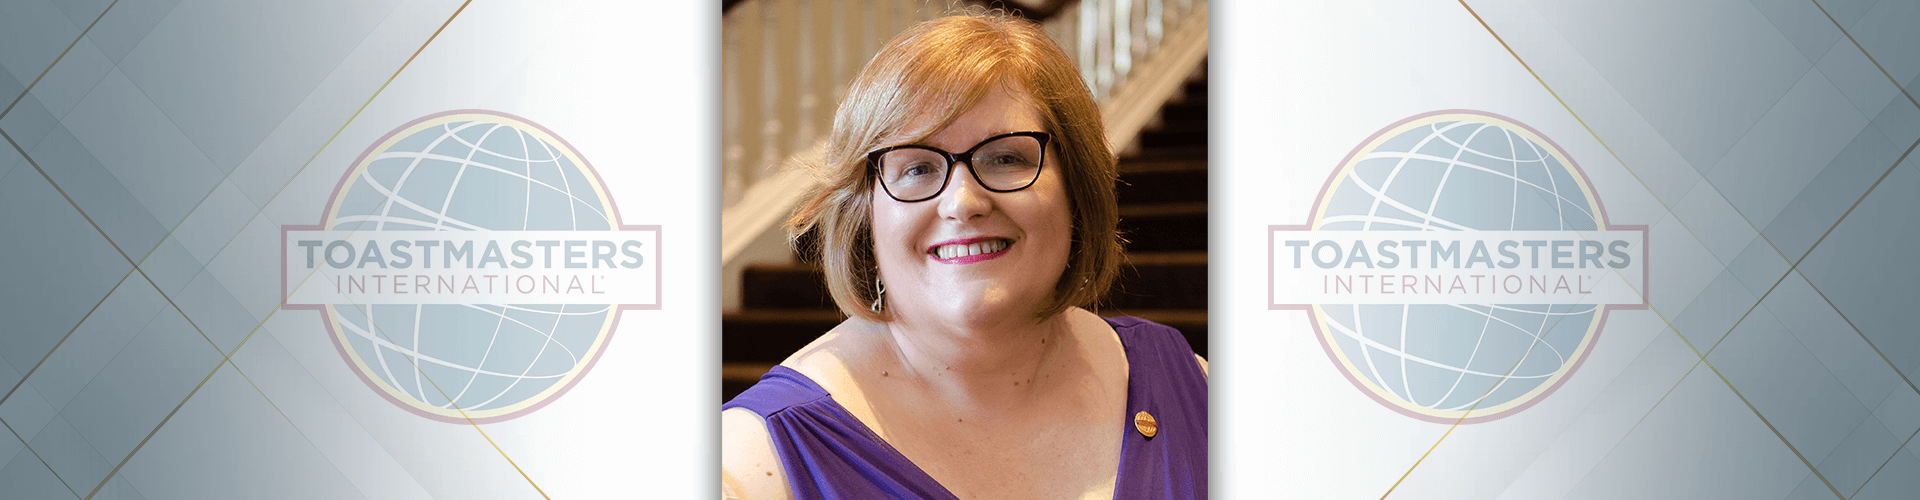 Toastmasters International President Morag Mathieson smiling in purple dress and gold pin